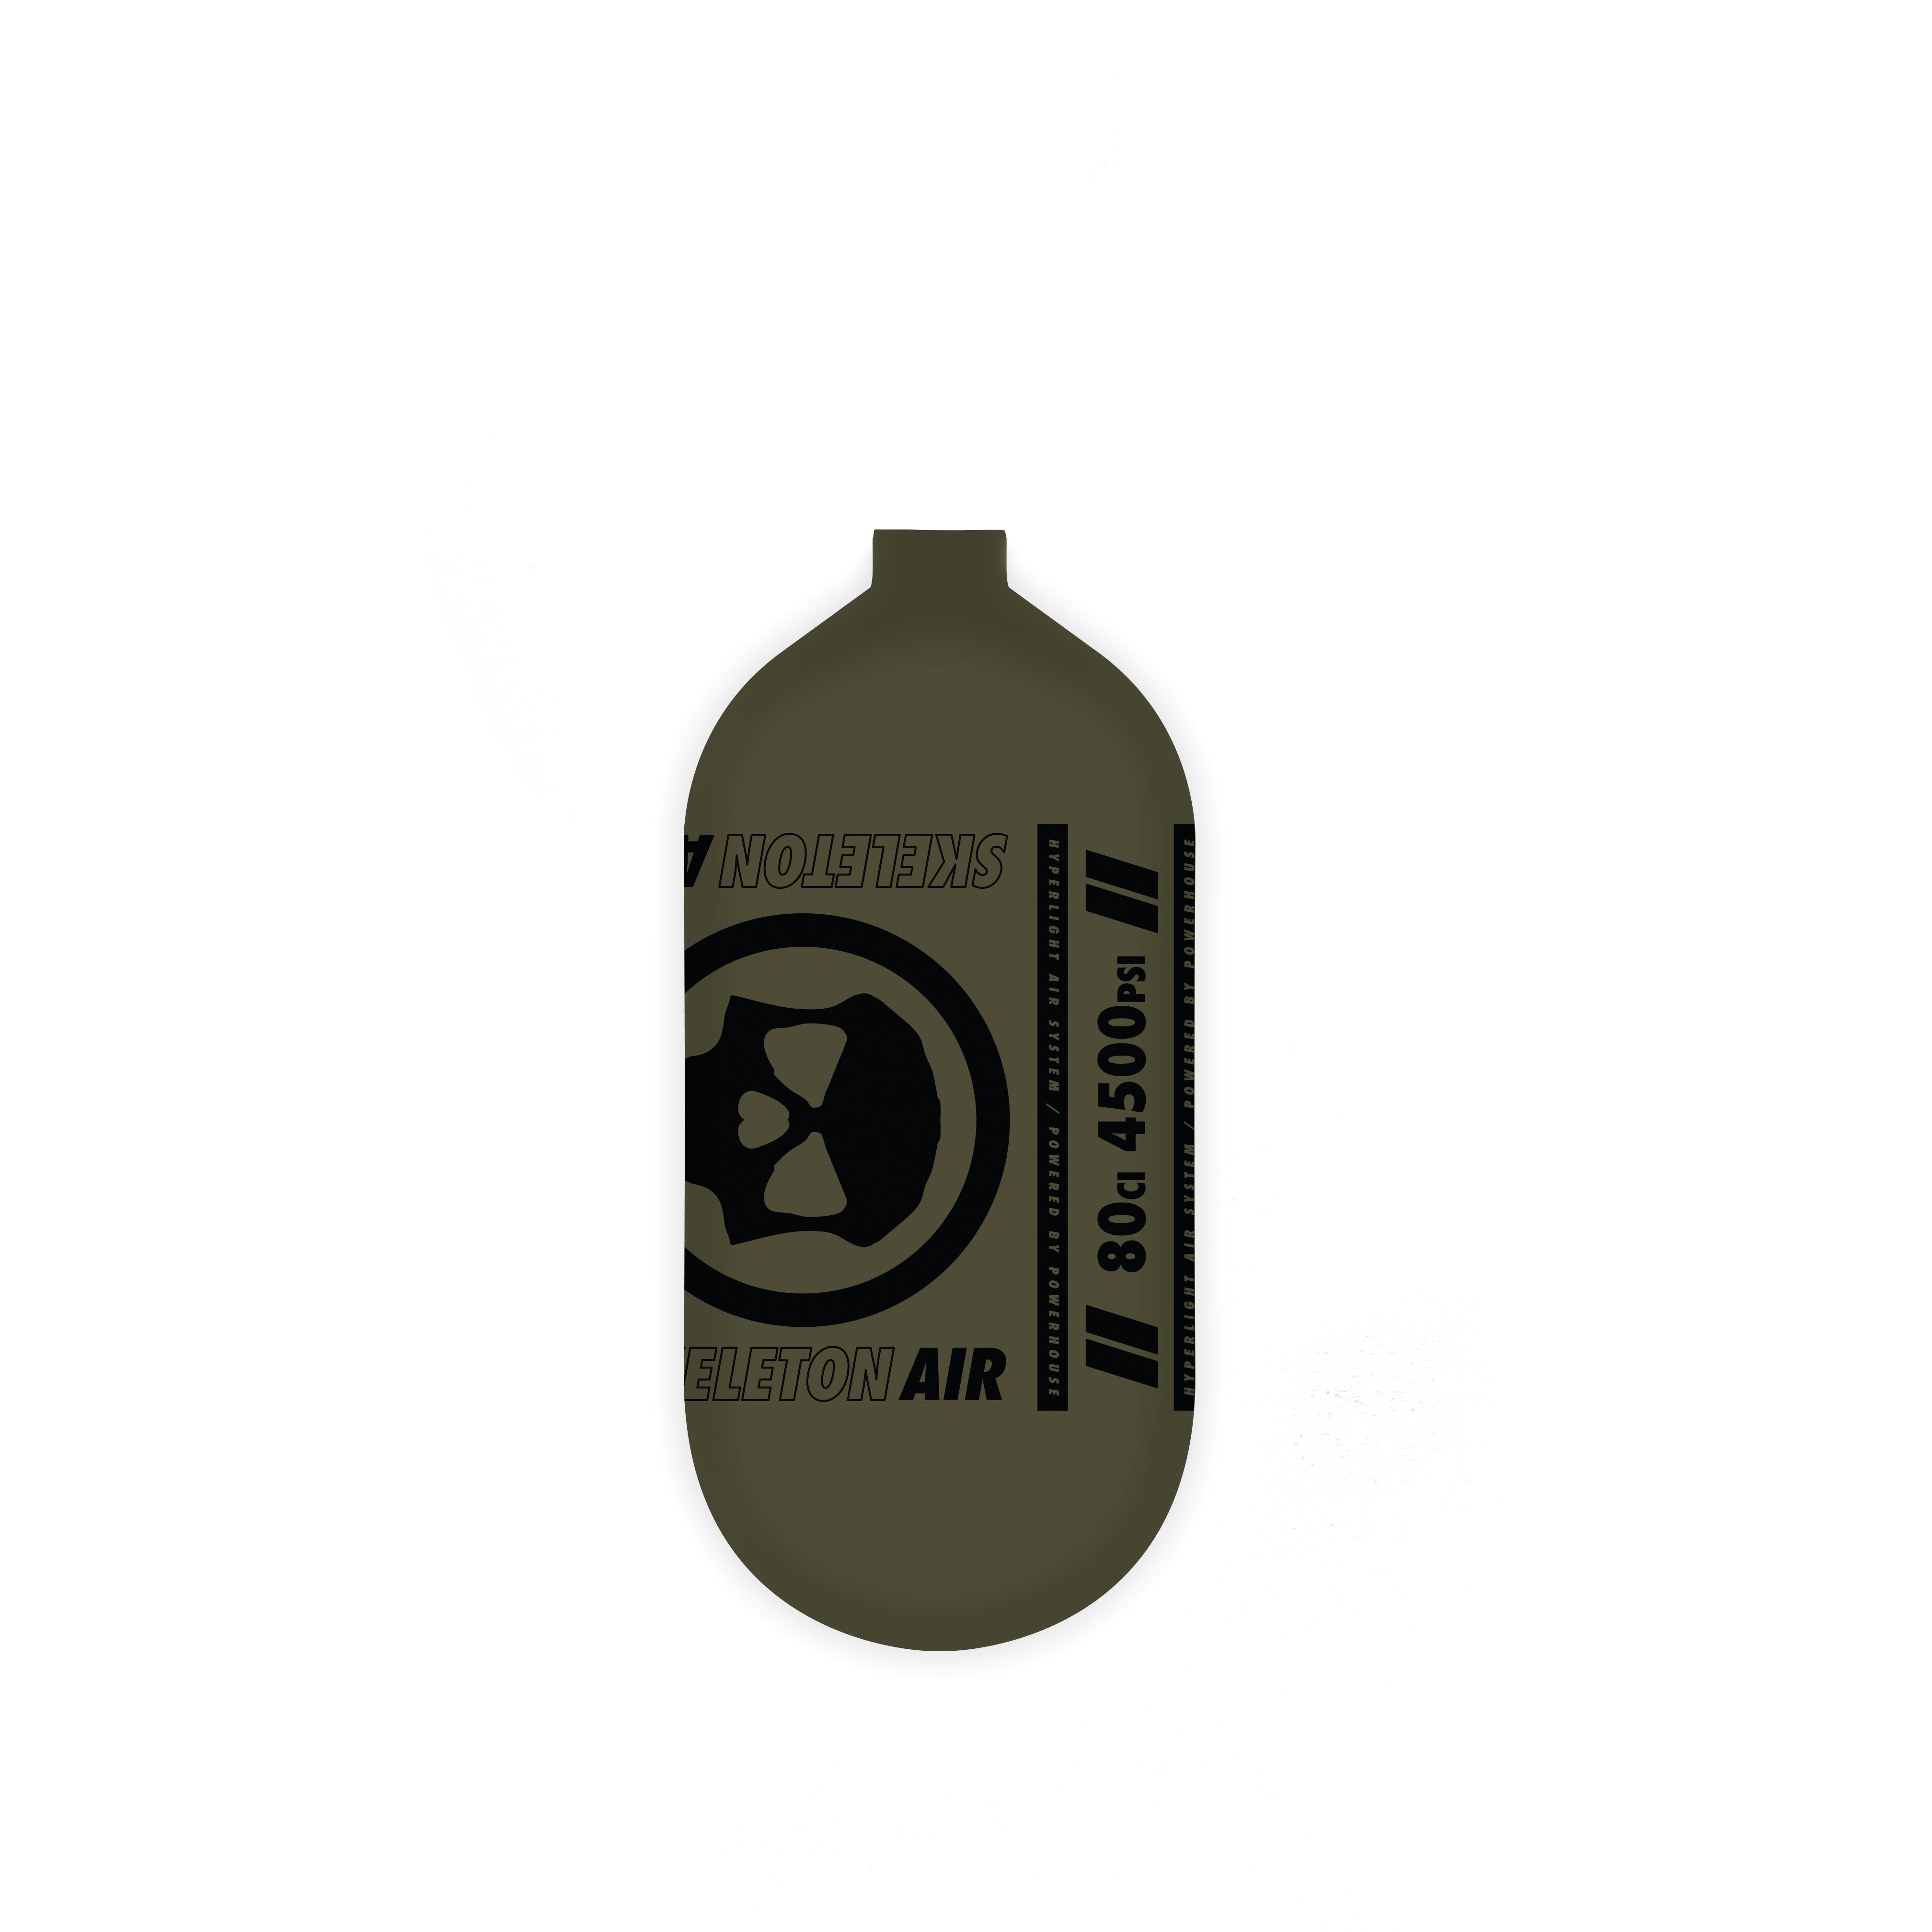 INFAMOUS AIR Hyperlight Paintball Tank - BOTTLE ONLY - Olive/Black - 80CI / 4500PSI